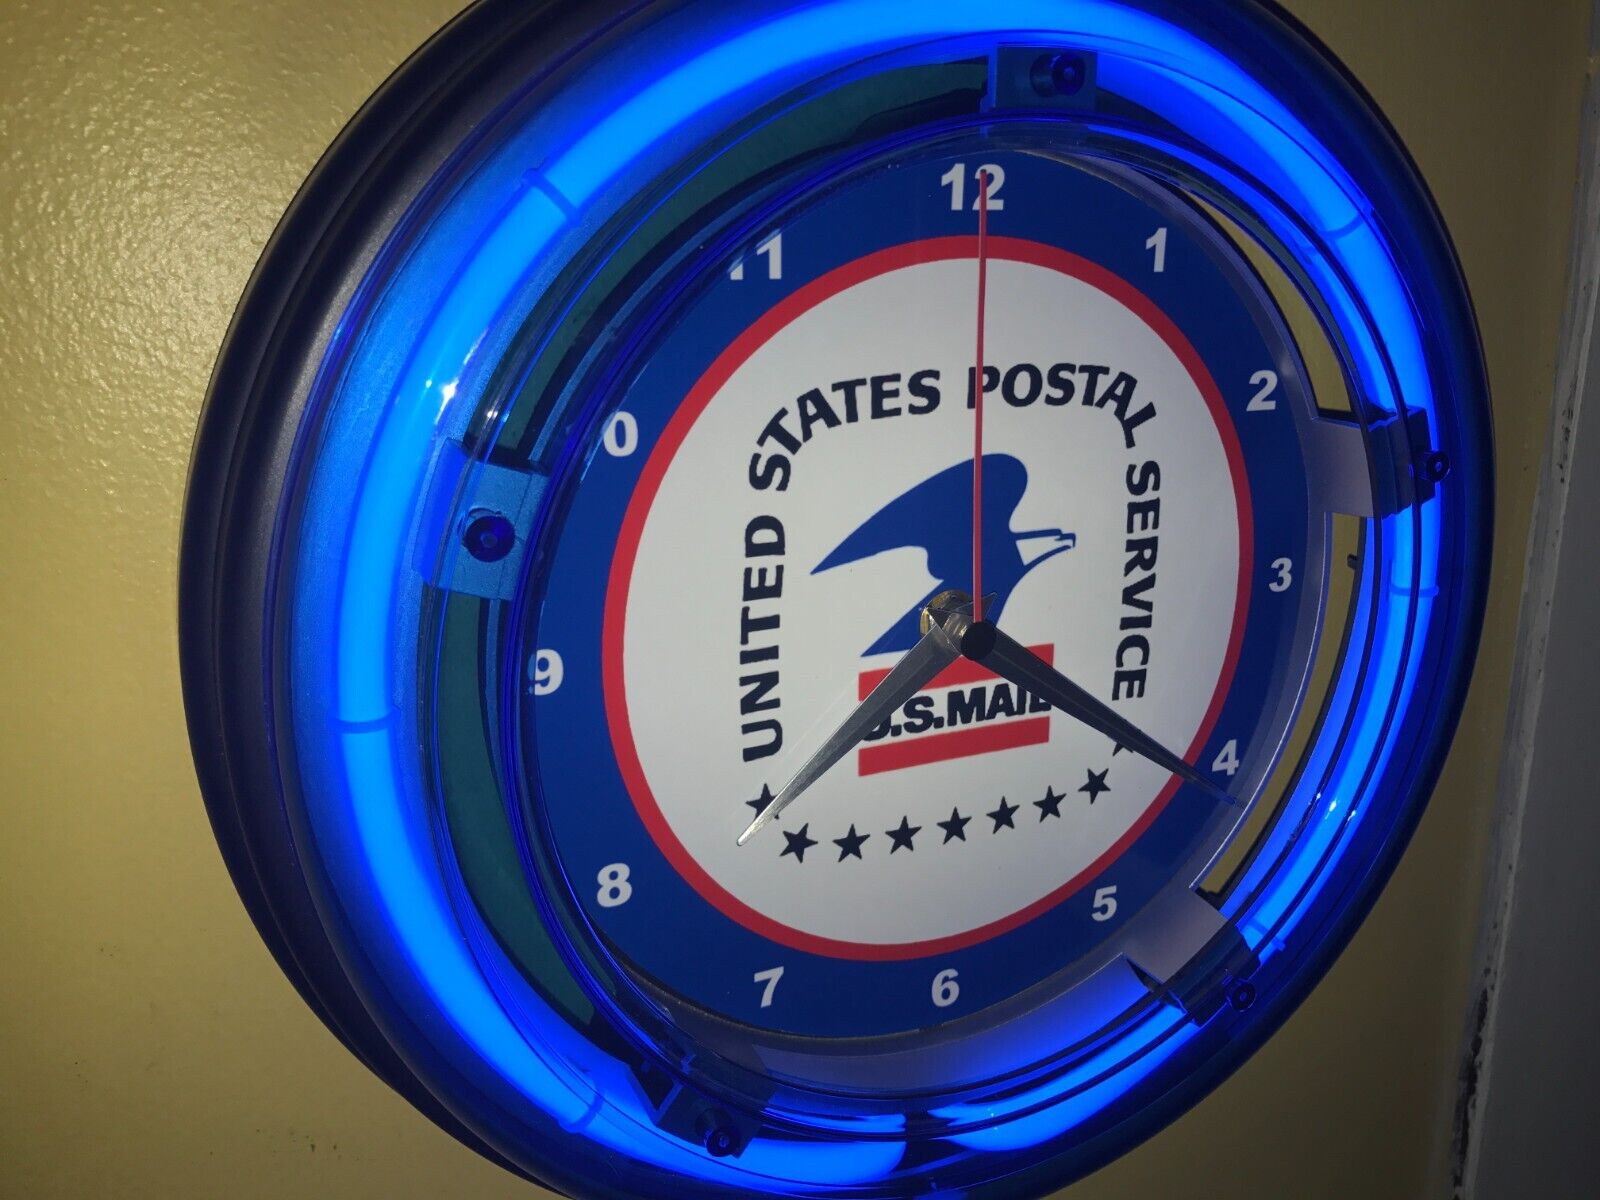 USPS Post Office OldLogo Mail Postal Carrier Advertising Neon Wall Clock Sign